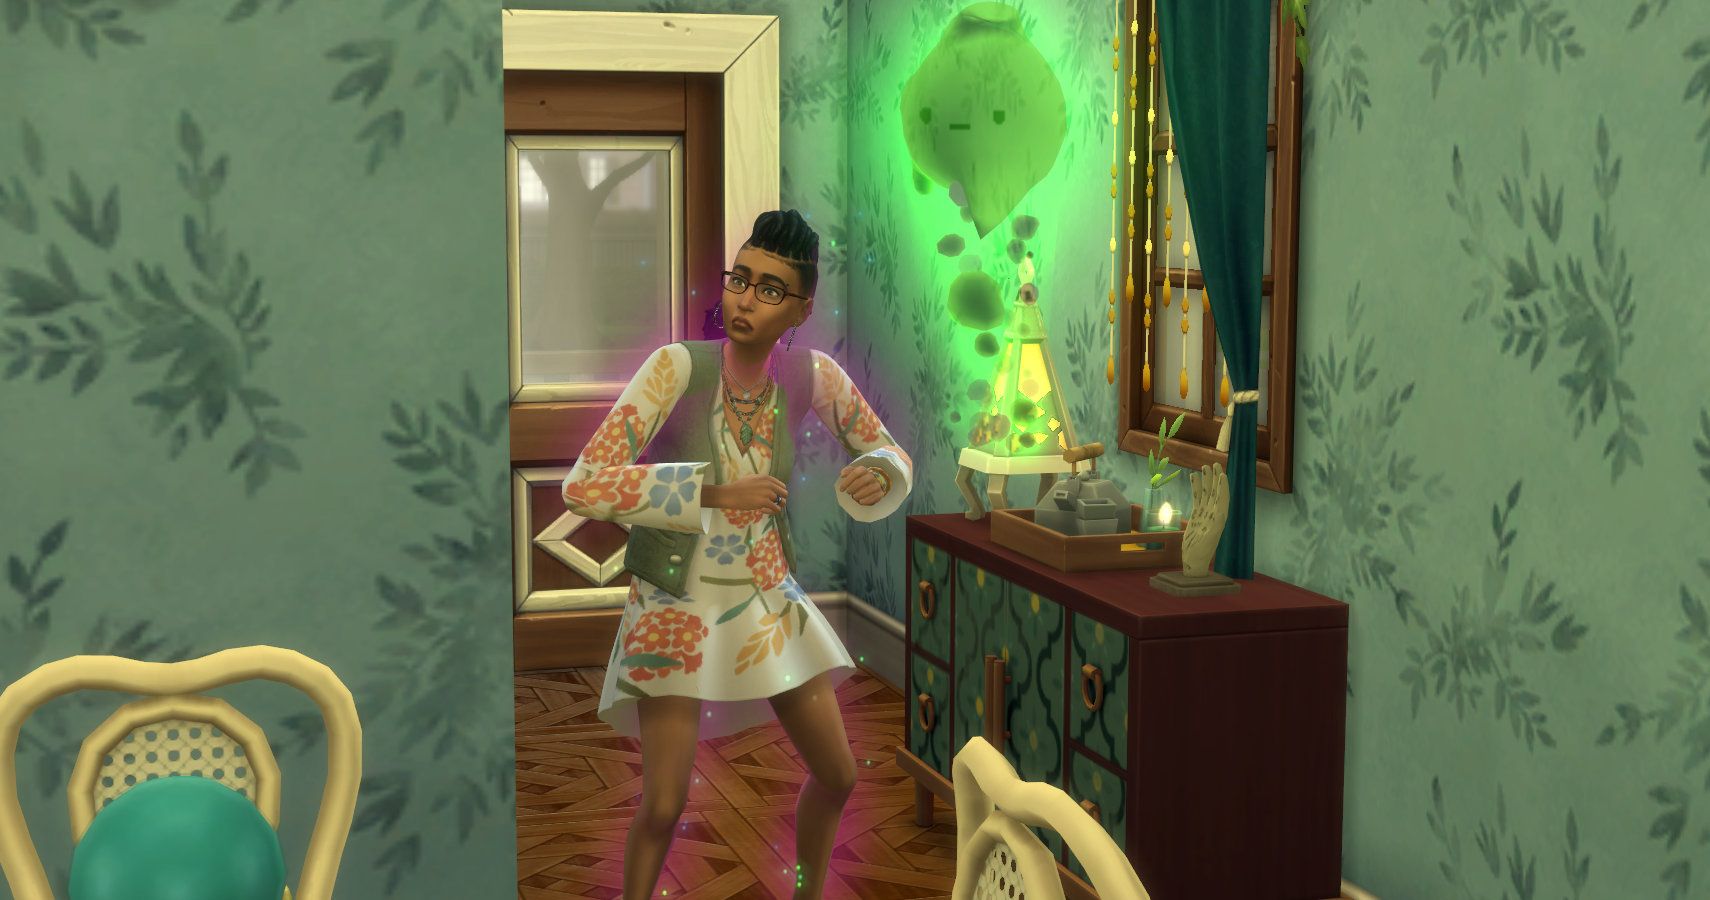 A terrified Sim freaking out abut a specter in front of her.